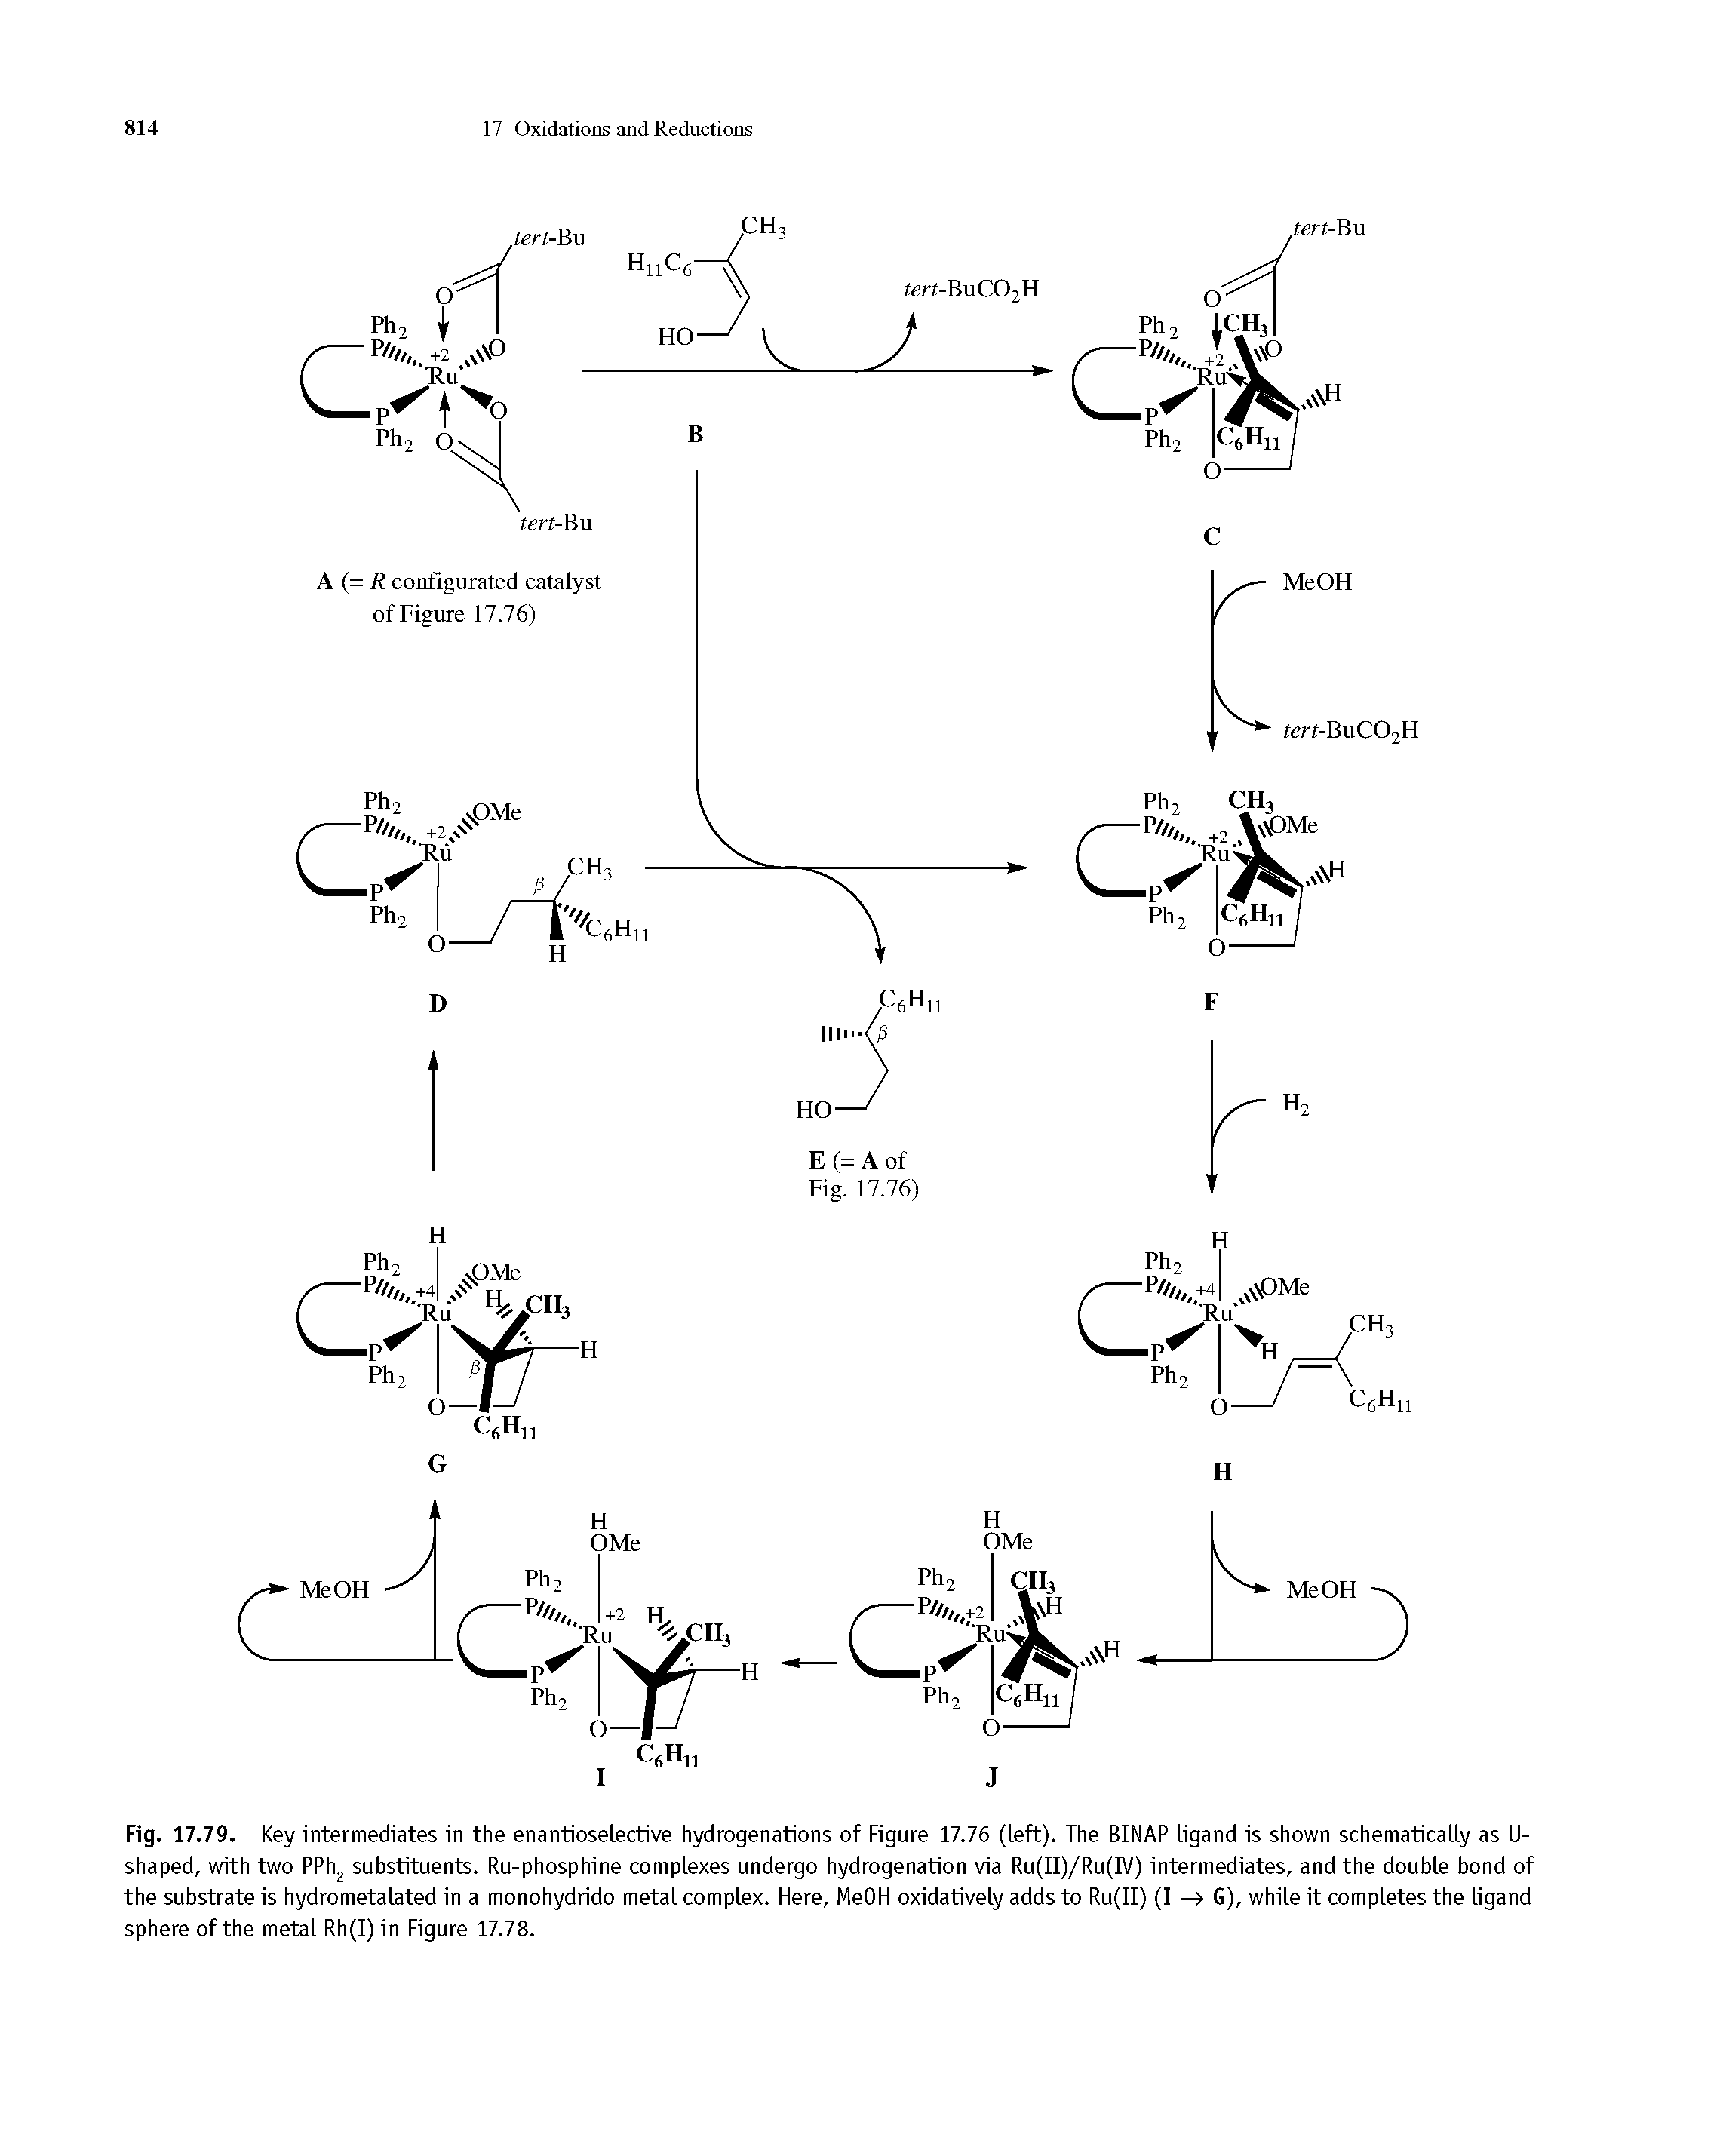 Fig. 17.79. Key intermediates in the enantioselective hydrogenations of Figure 17.76 (left). The BINAP ligand is shown schematically as U-shaped, with two PPh2 substituents. Ru-phosphine complexes undergo hydrogenation via Ru(II)/Ru(IV) intermediates, and the double bond of the substrate is hydrometatated in a monohydrido metal complex. Here, HeOH oxidatively adds to Ru(II) (I —> G), white it completes the ligand sphere of the metal Rh(I) in Figure 17.78.